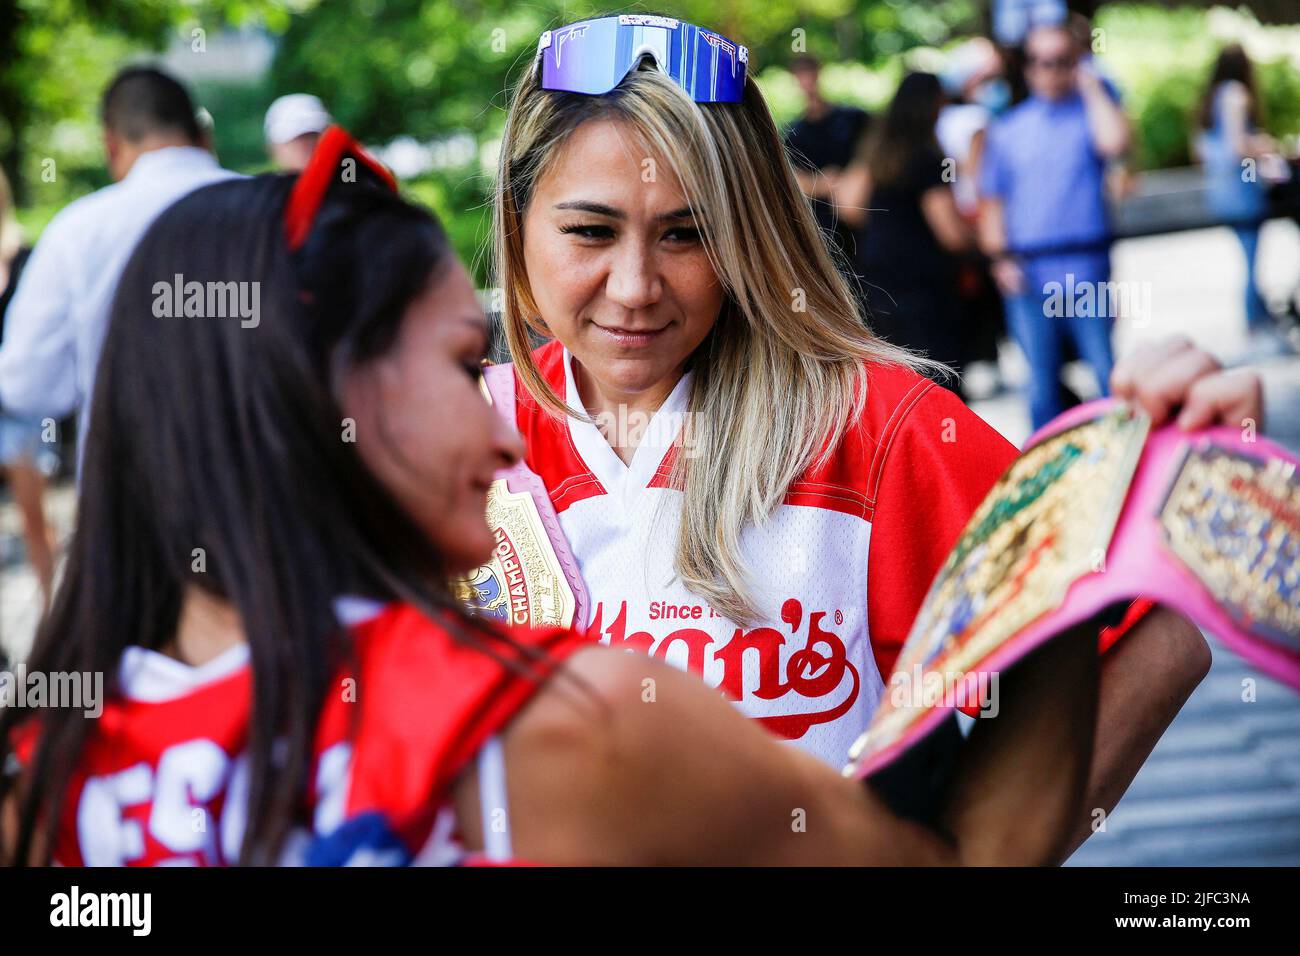 World Champion Miki Sudo looks at the 2021 Women World Championship belt of  Michelle Lesco before being weigh-in ahead of Nathan's Famous Fourth of  July International Hot Dog-Eating Contest in New York,